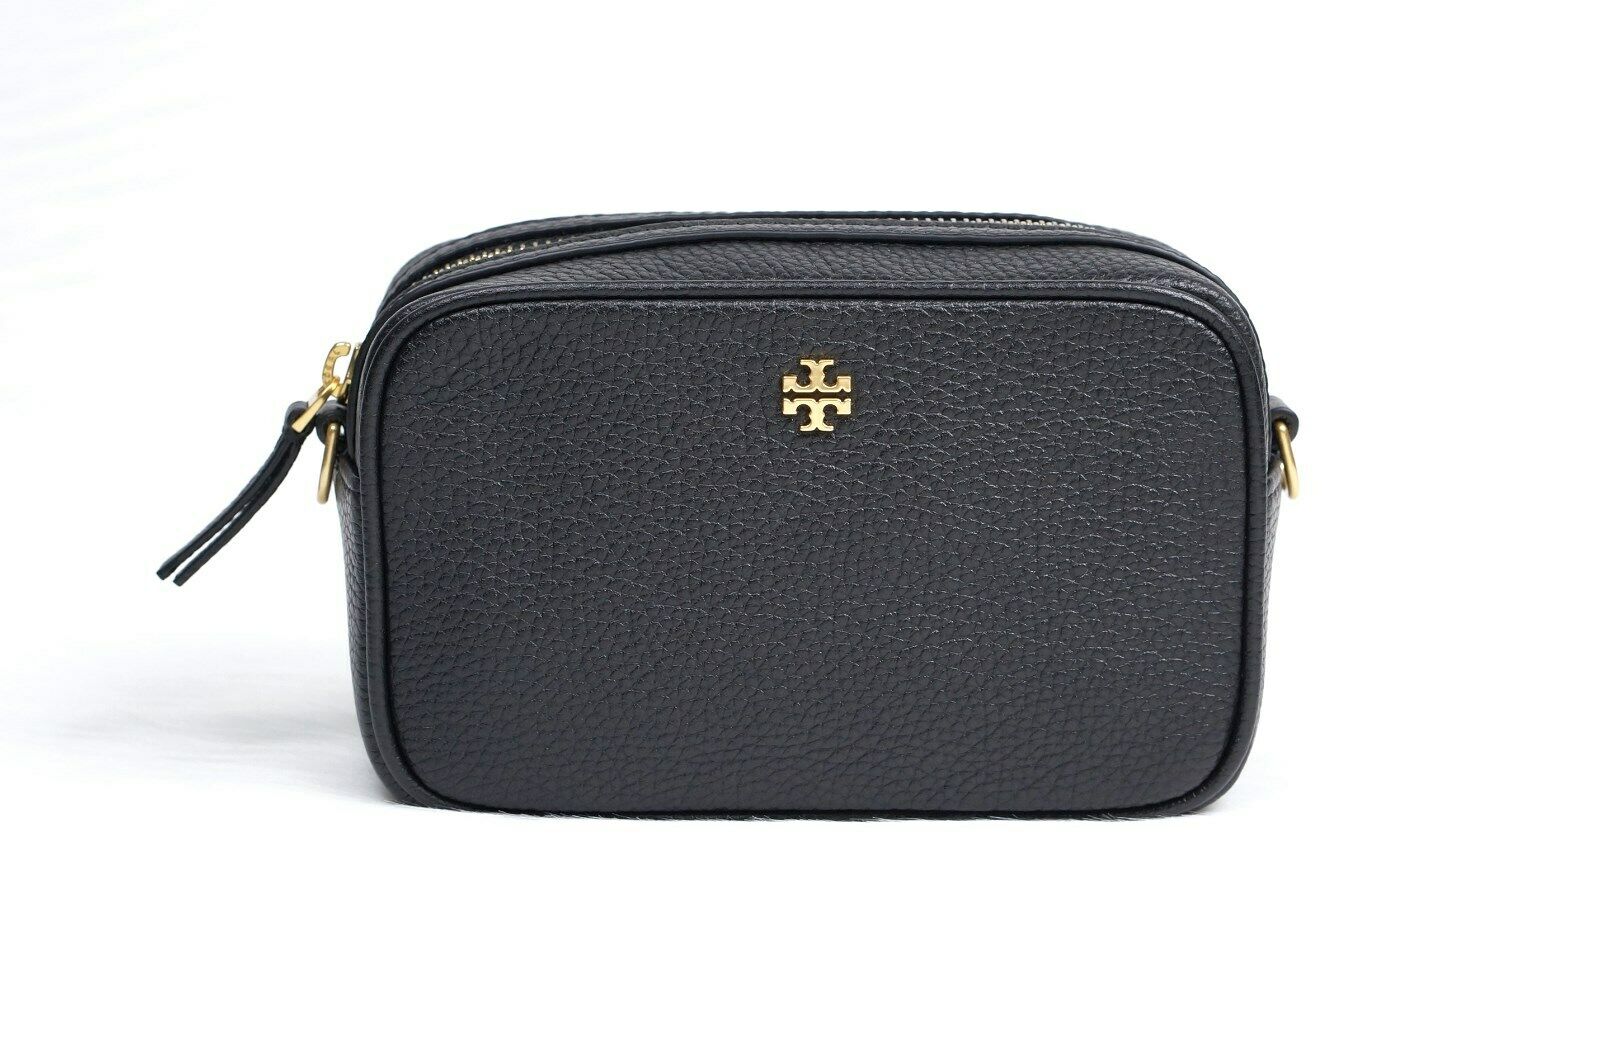 What's In My Small Bag? ft. Tory Burch Camera Bag 